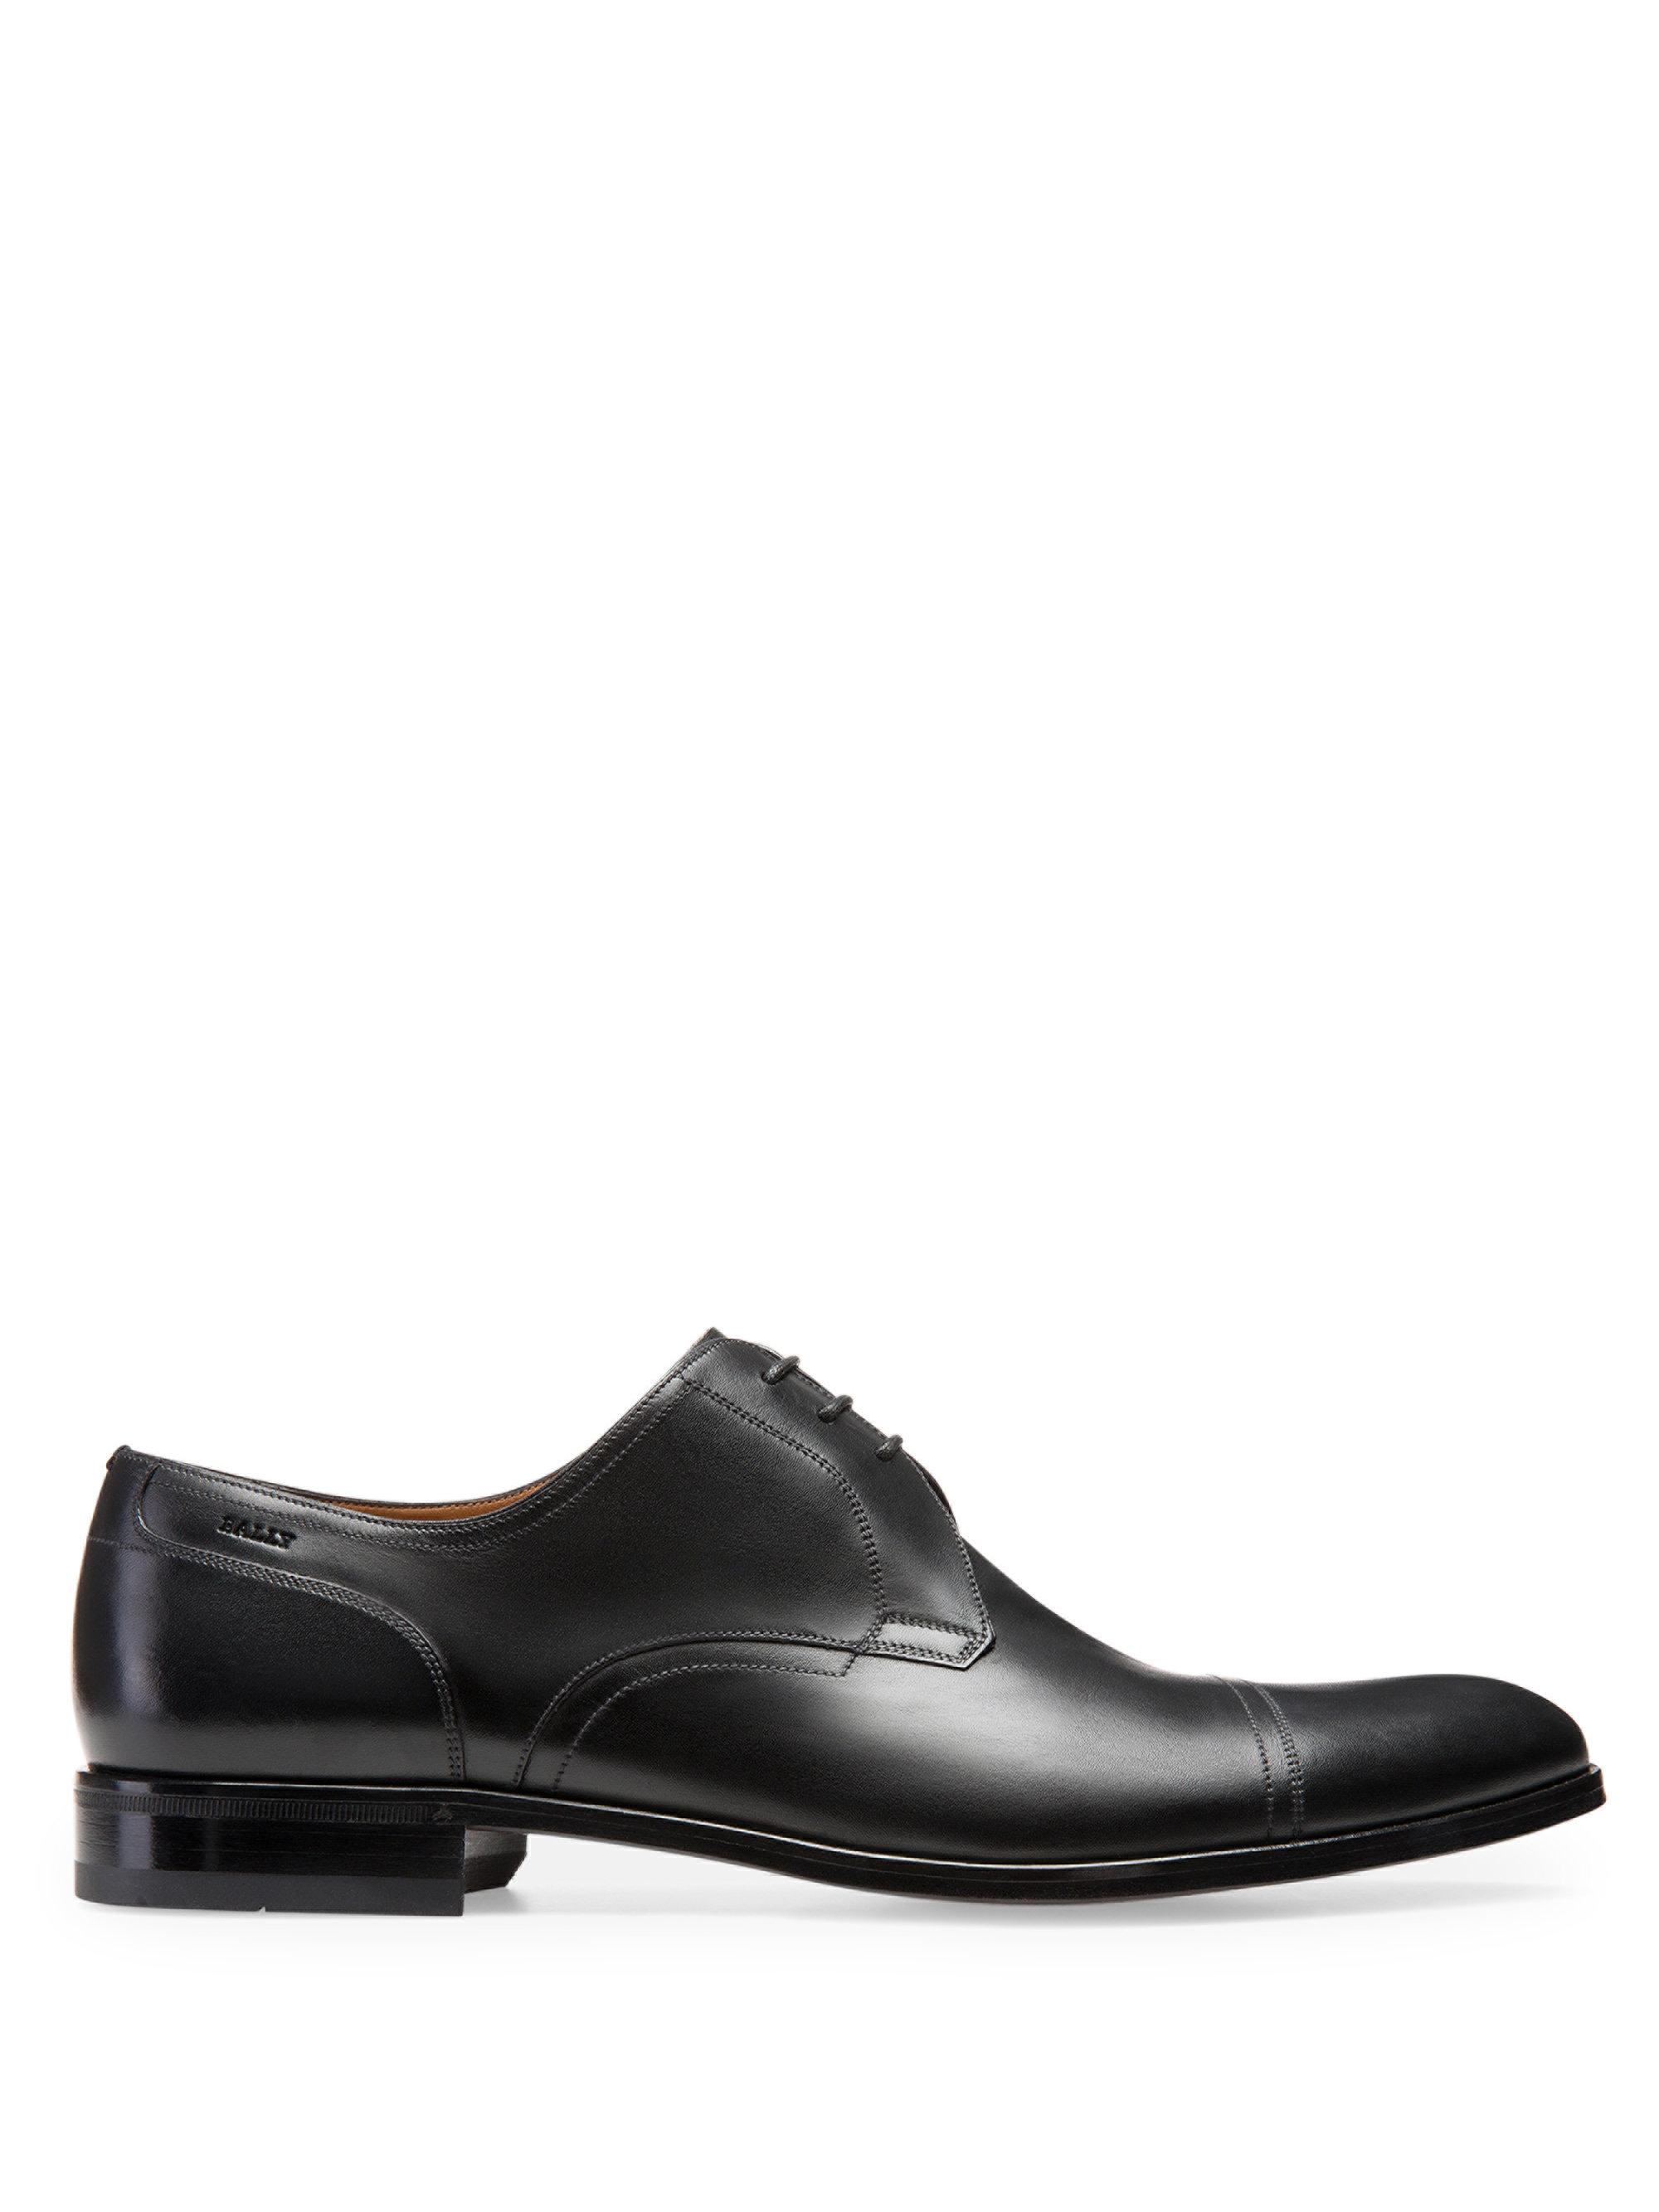 Lyst - Bally Brustel Leather Derby Shoes in Black for Men